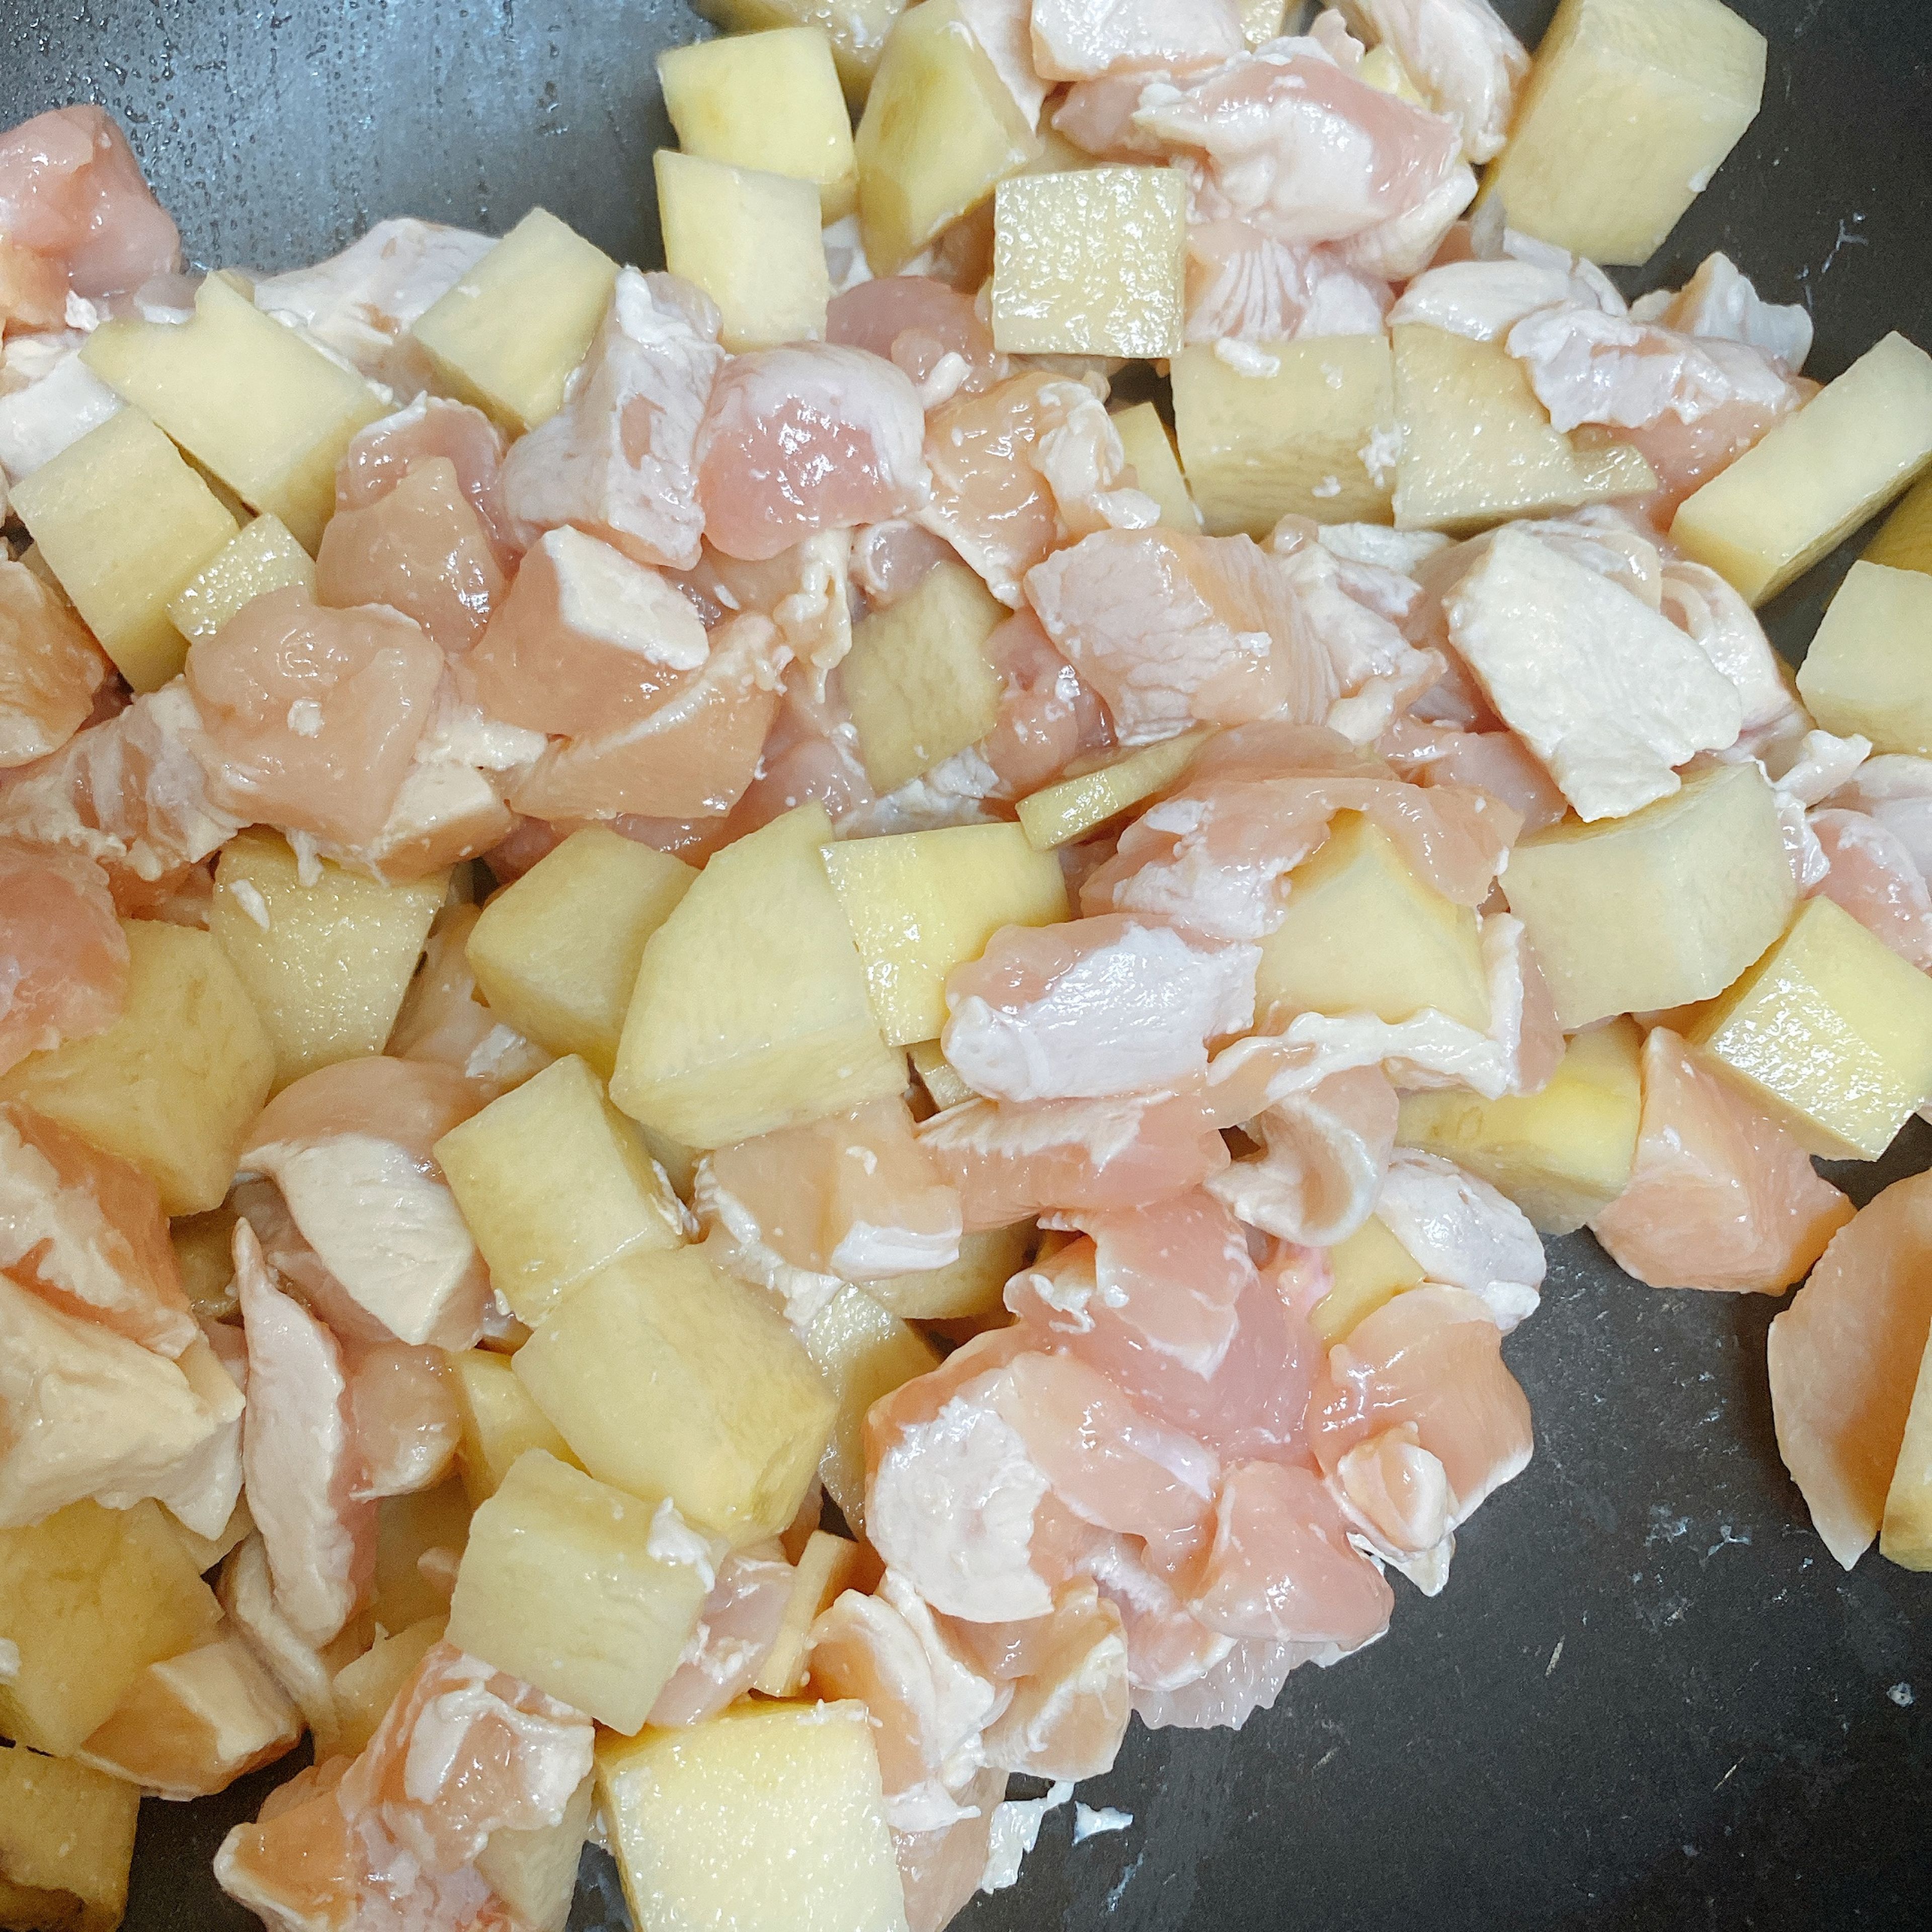 Turn the stove on to high. Add oil to the wok. When it’s heated, fry the potato and chicken for a minute.